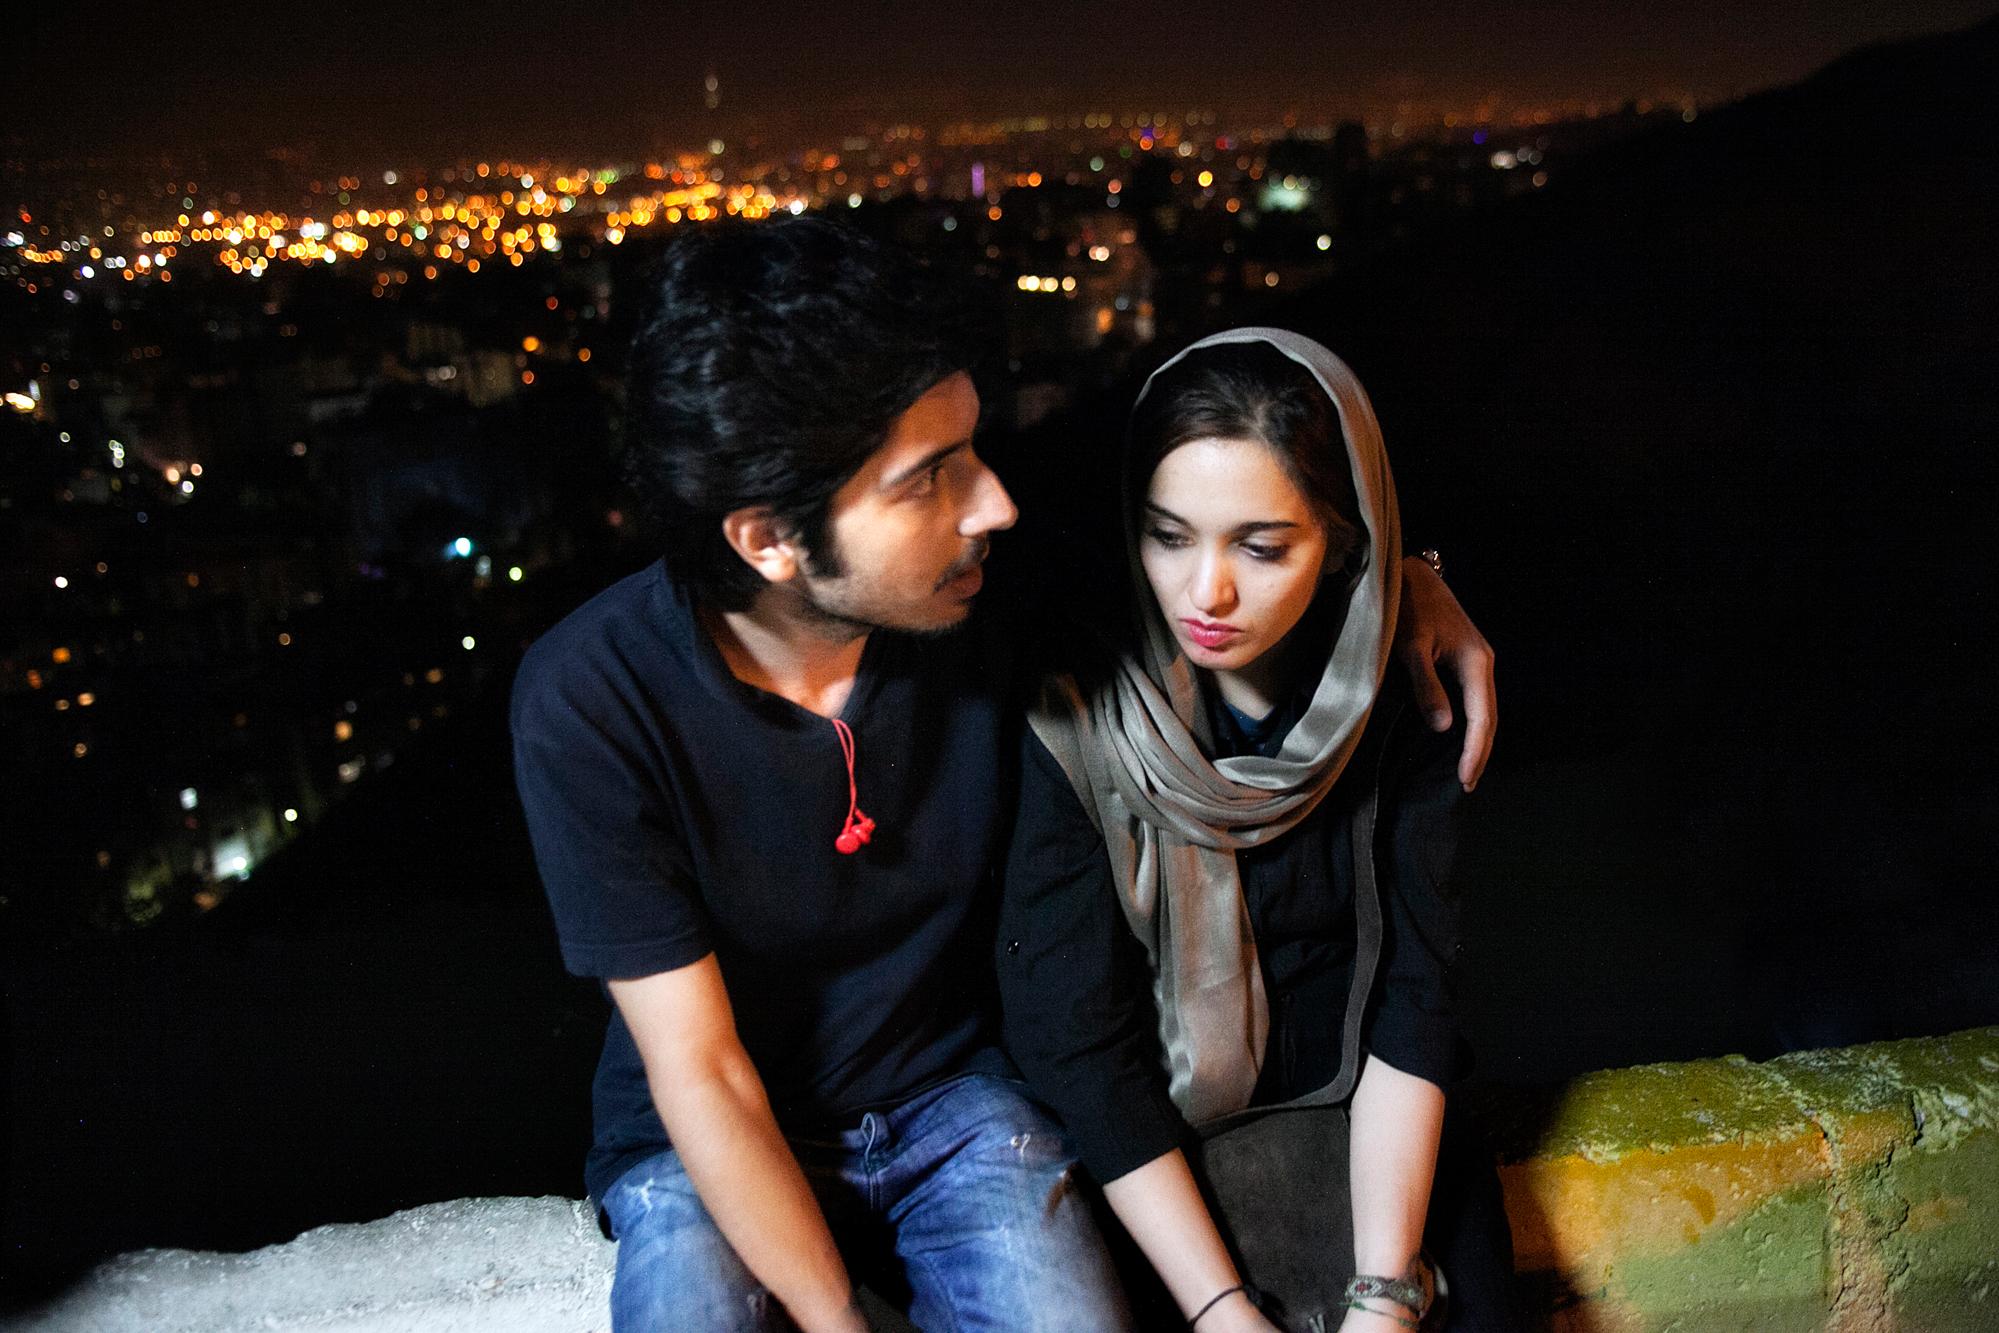 Tehran : the faces of freedom - Bam Tehran is considered as the rooftop of Tehran, away...